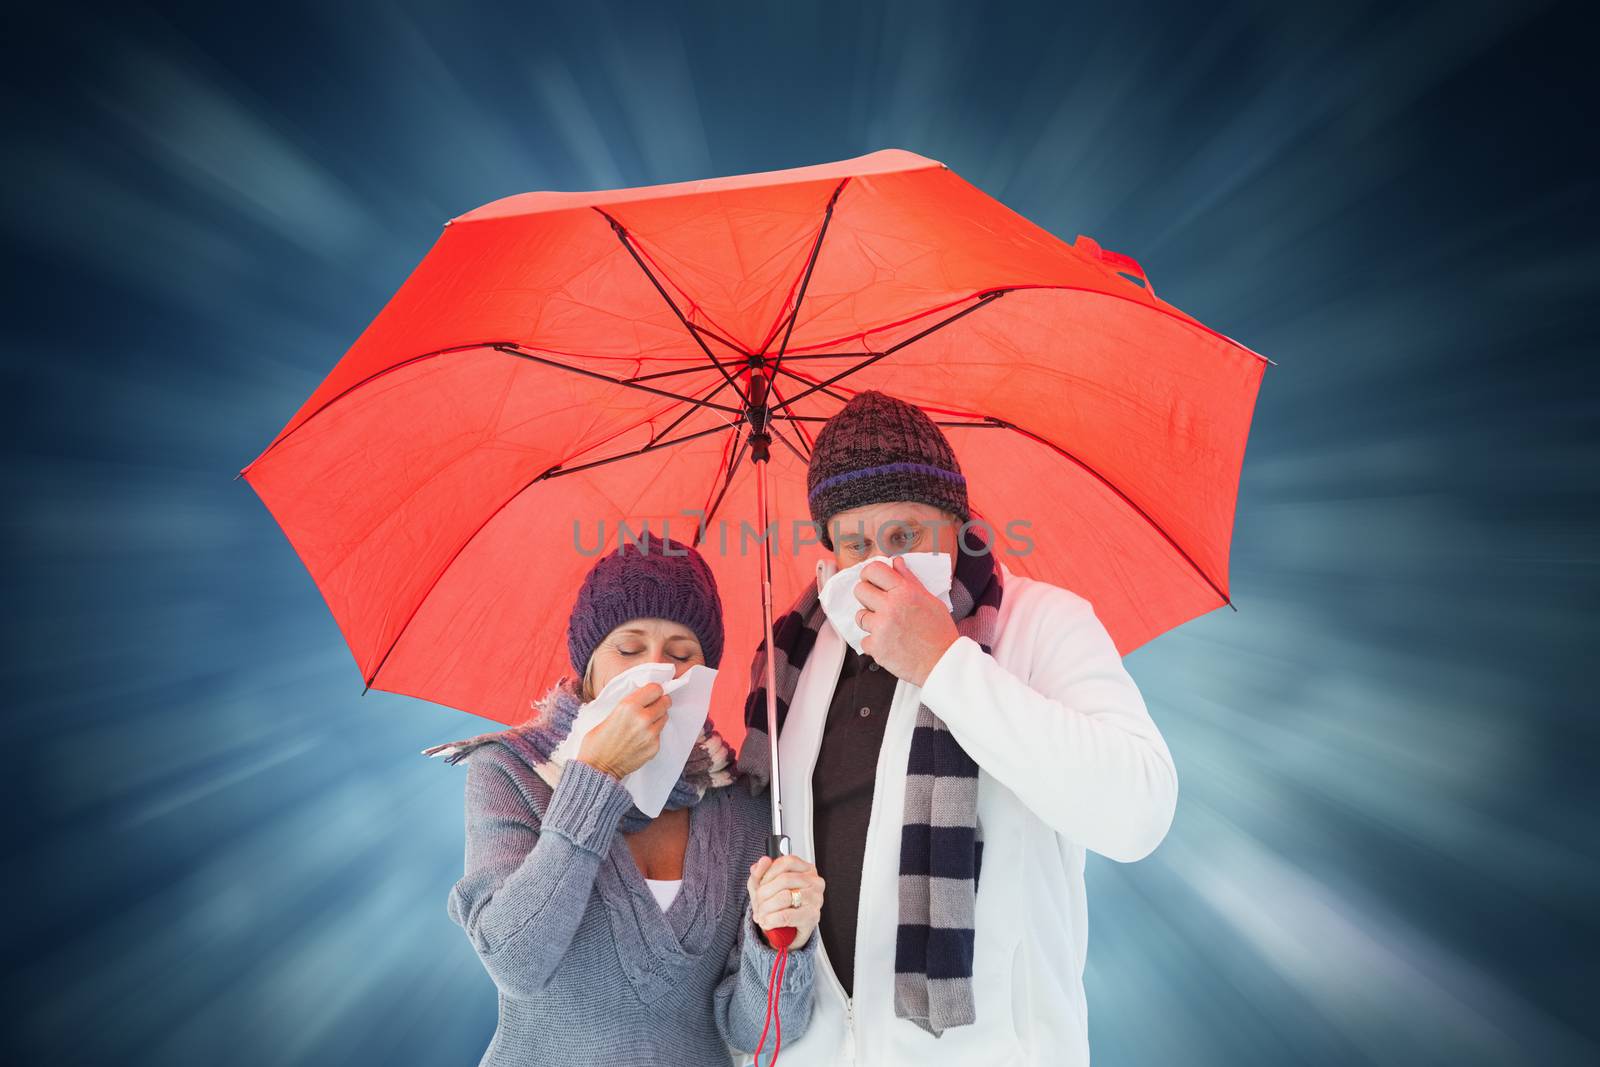 Mature couple blowing their noses under umbrella against blue abstract light spot design